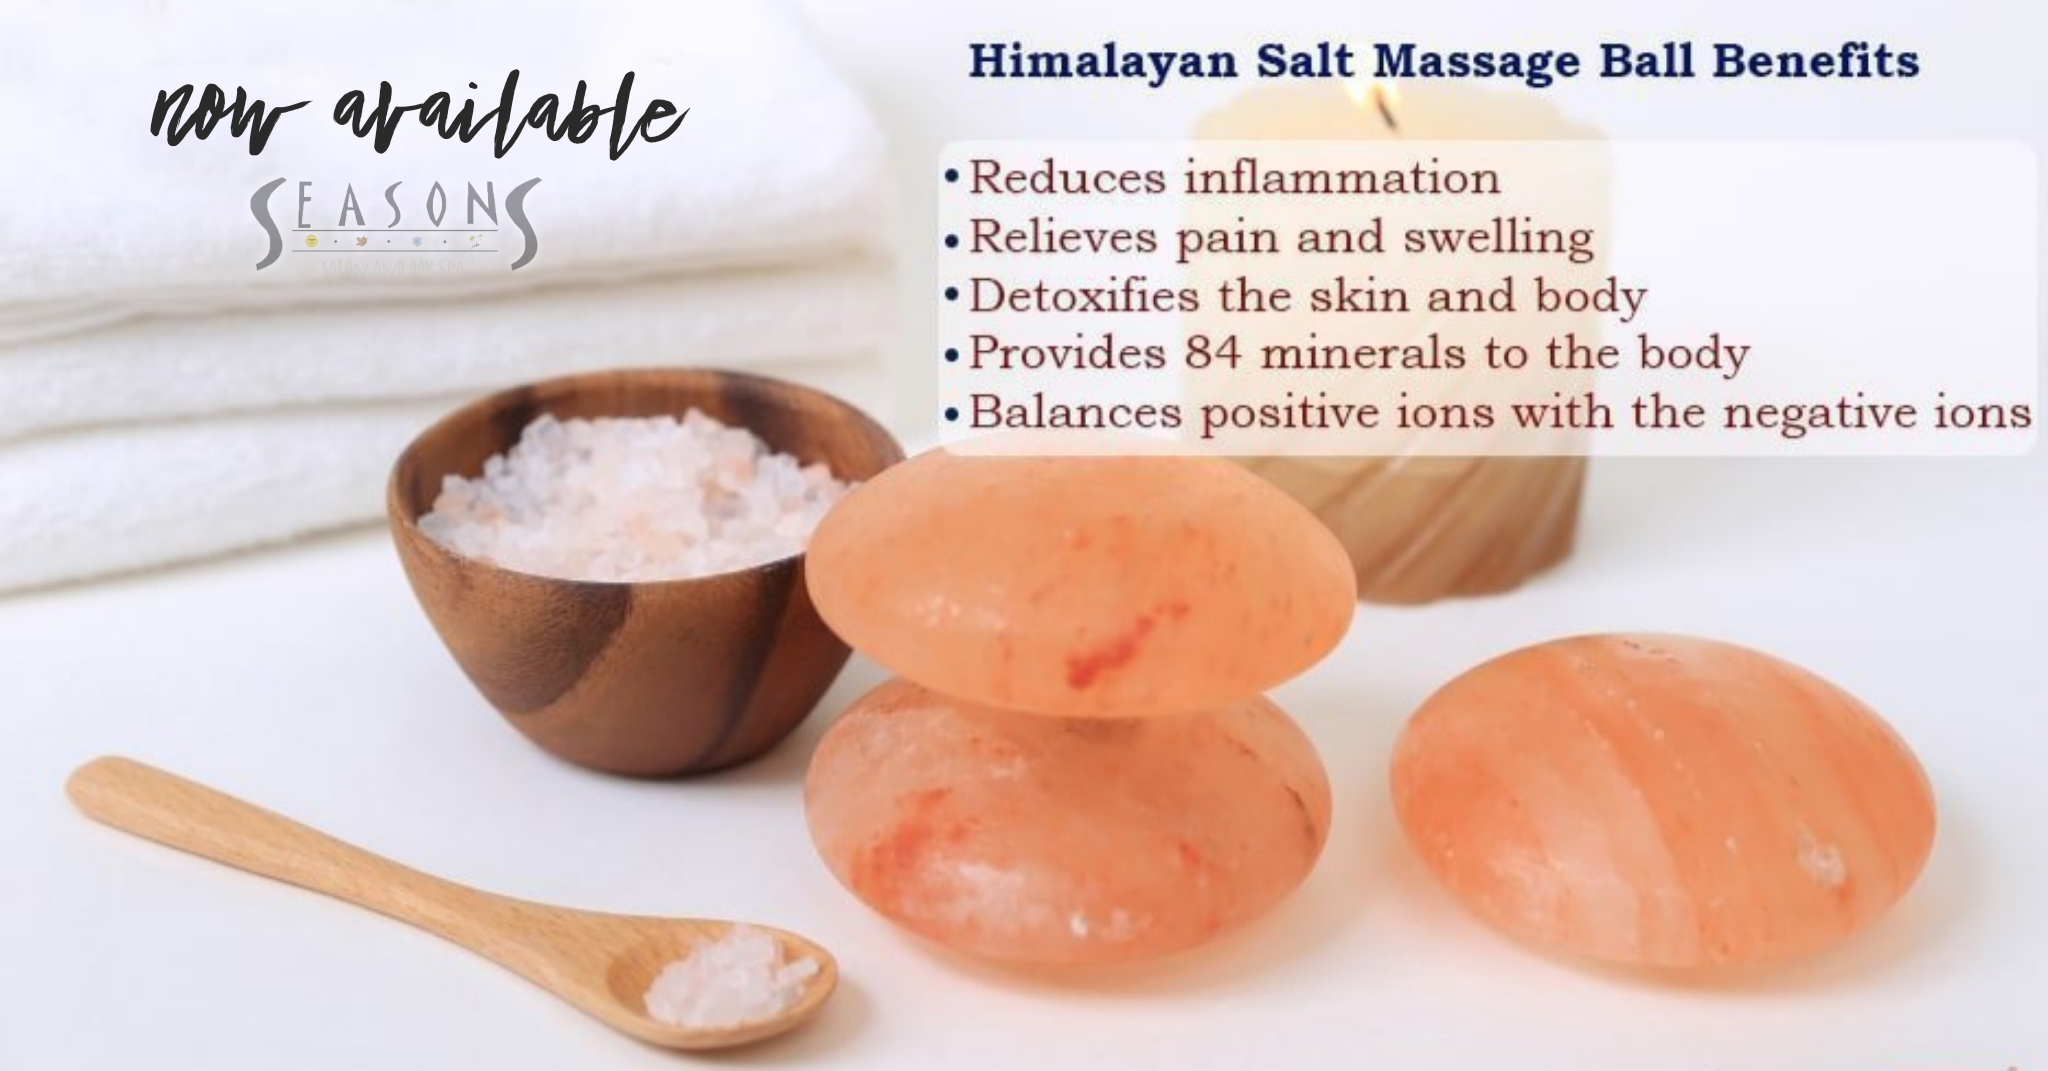 Himalayan Hot Stone Massage Are The Stones Ability To Promote Deep Relaxation Seasons Salon